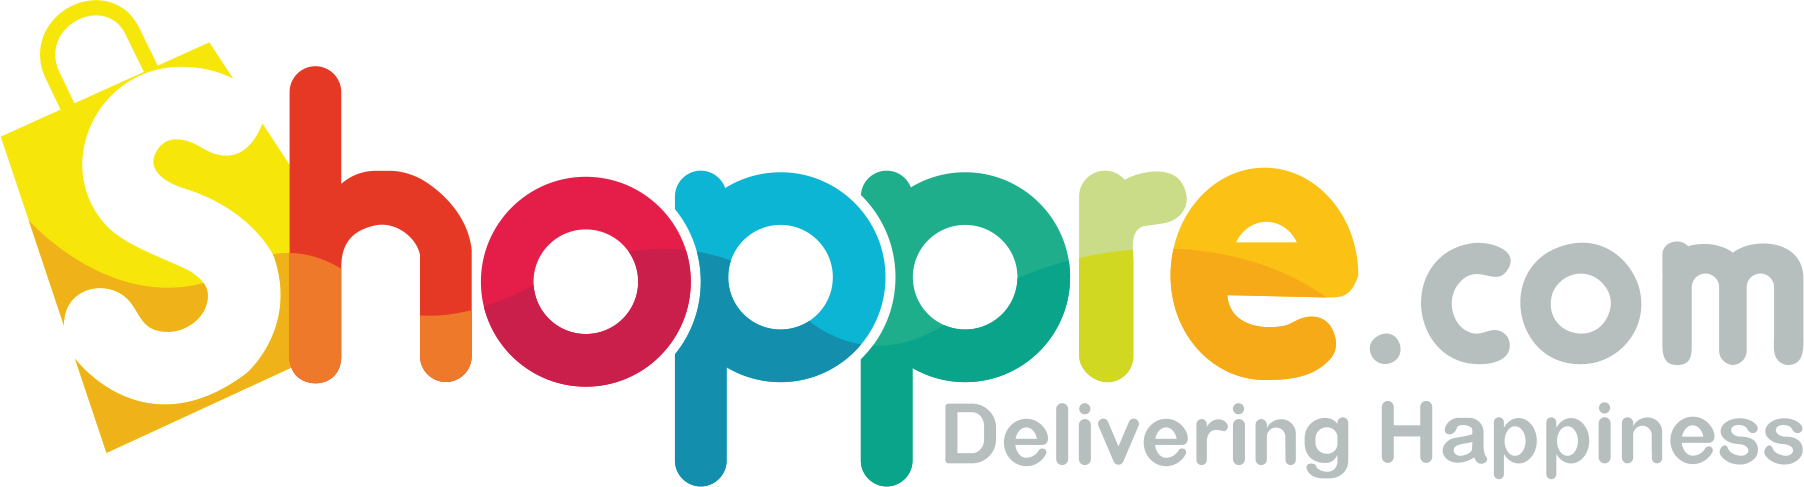 shoppre.com - your global shipping partner from india